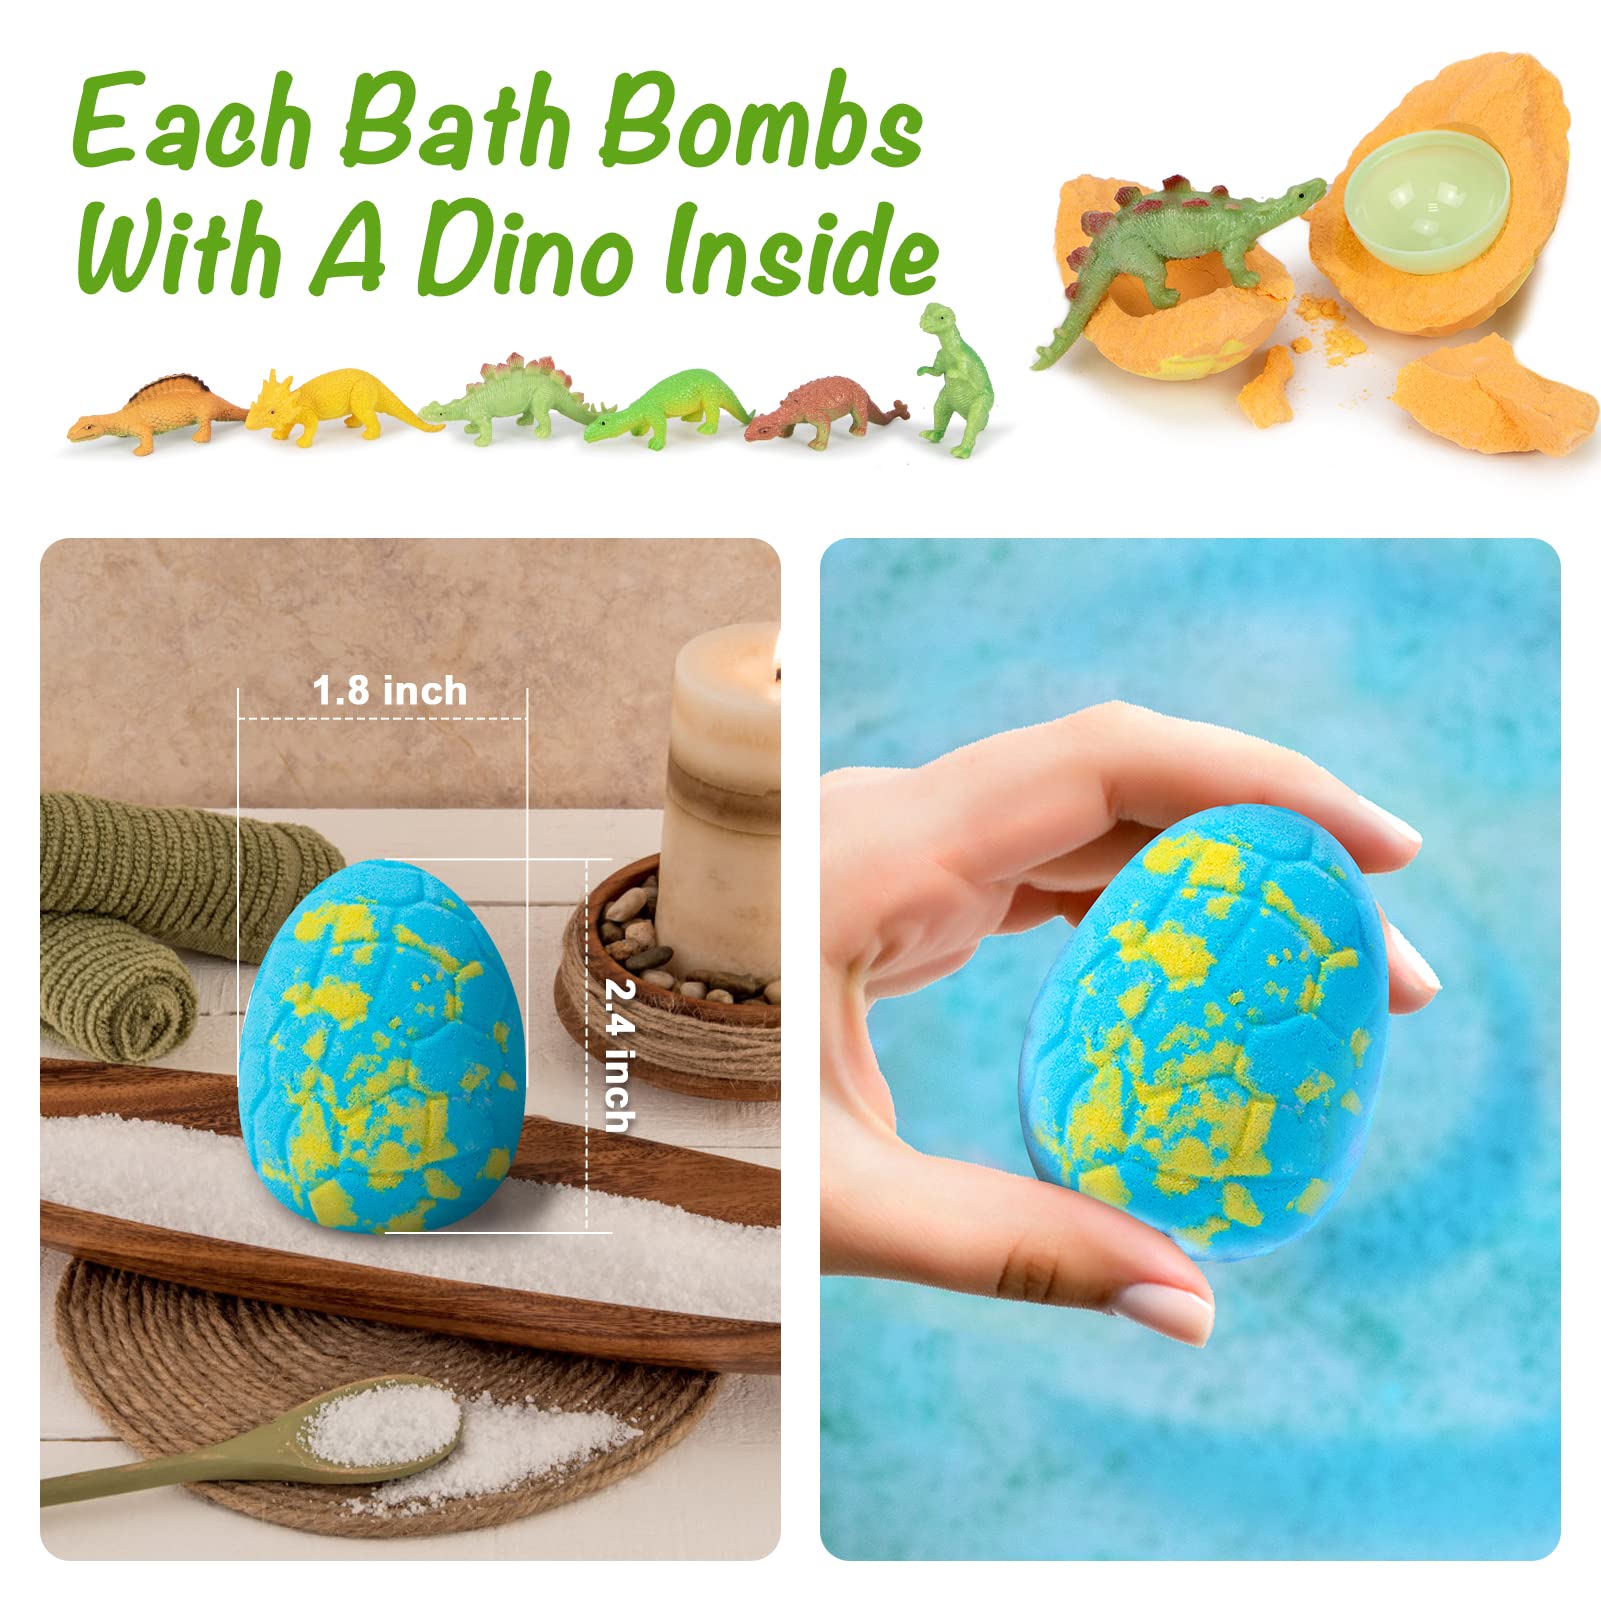 HOTLAKE Dinosaur Bath Bombs Gift Set,16 Pack Organic Bath Bomb for Kids with Toys Surprise Inside. Natural Dino Egg Bathbombs Kit for Christmas or Birthday Gift for Girls and Boys